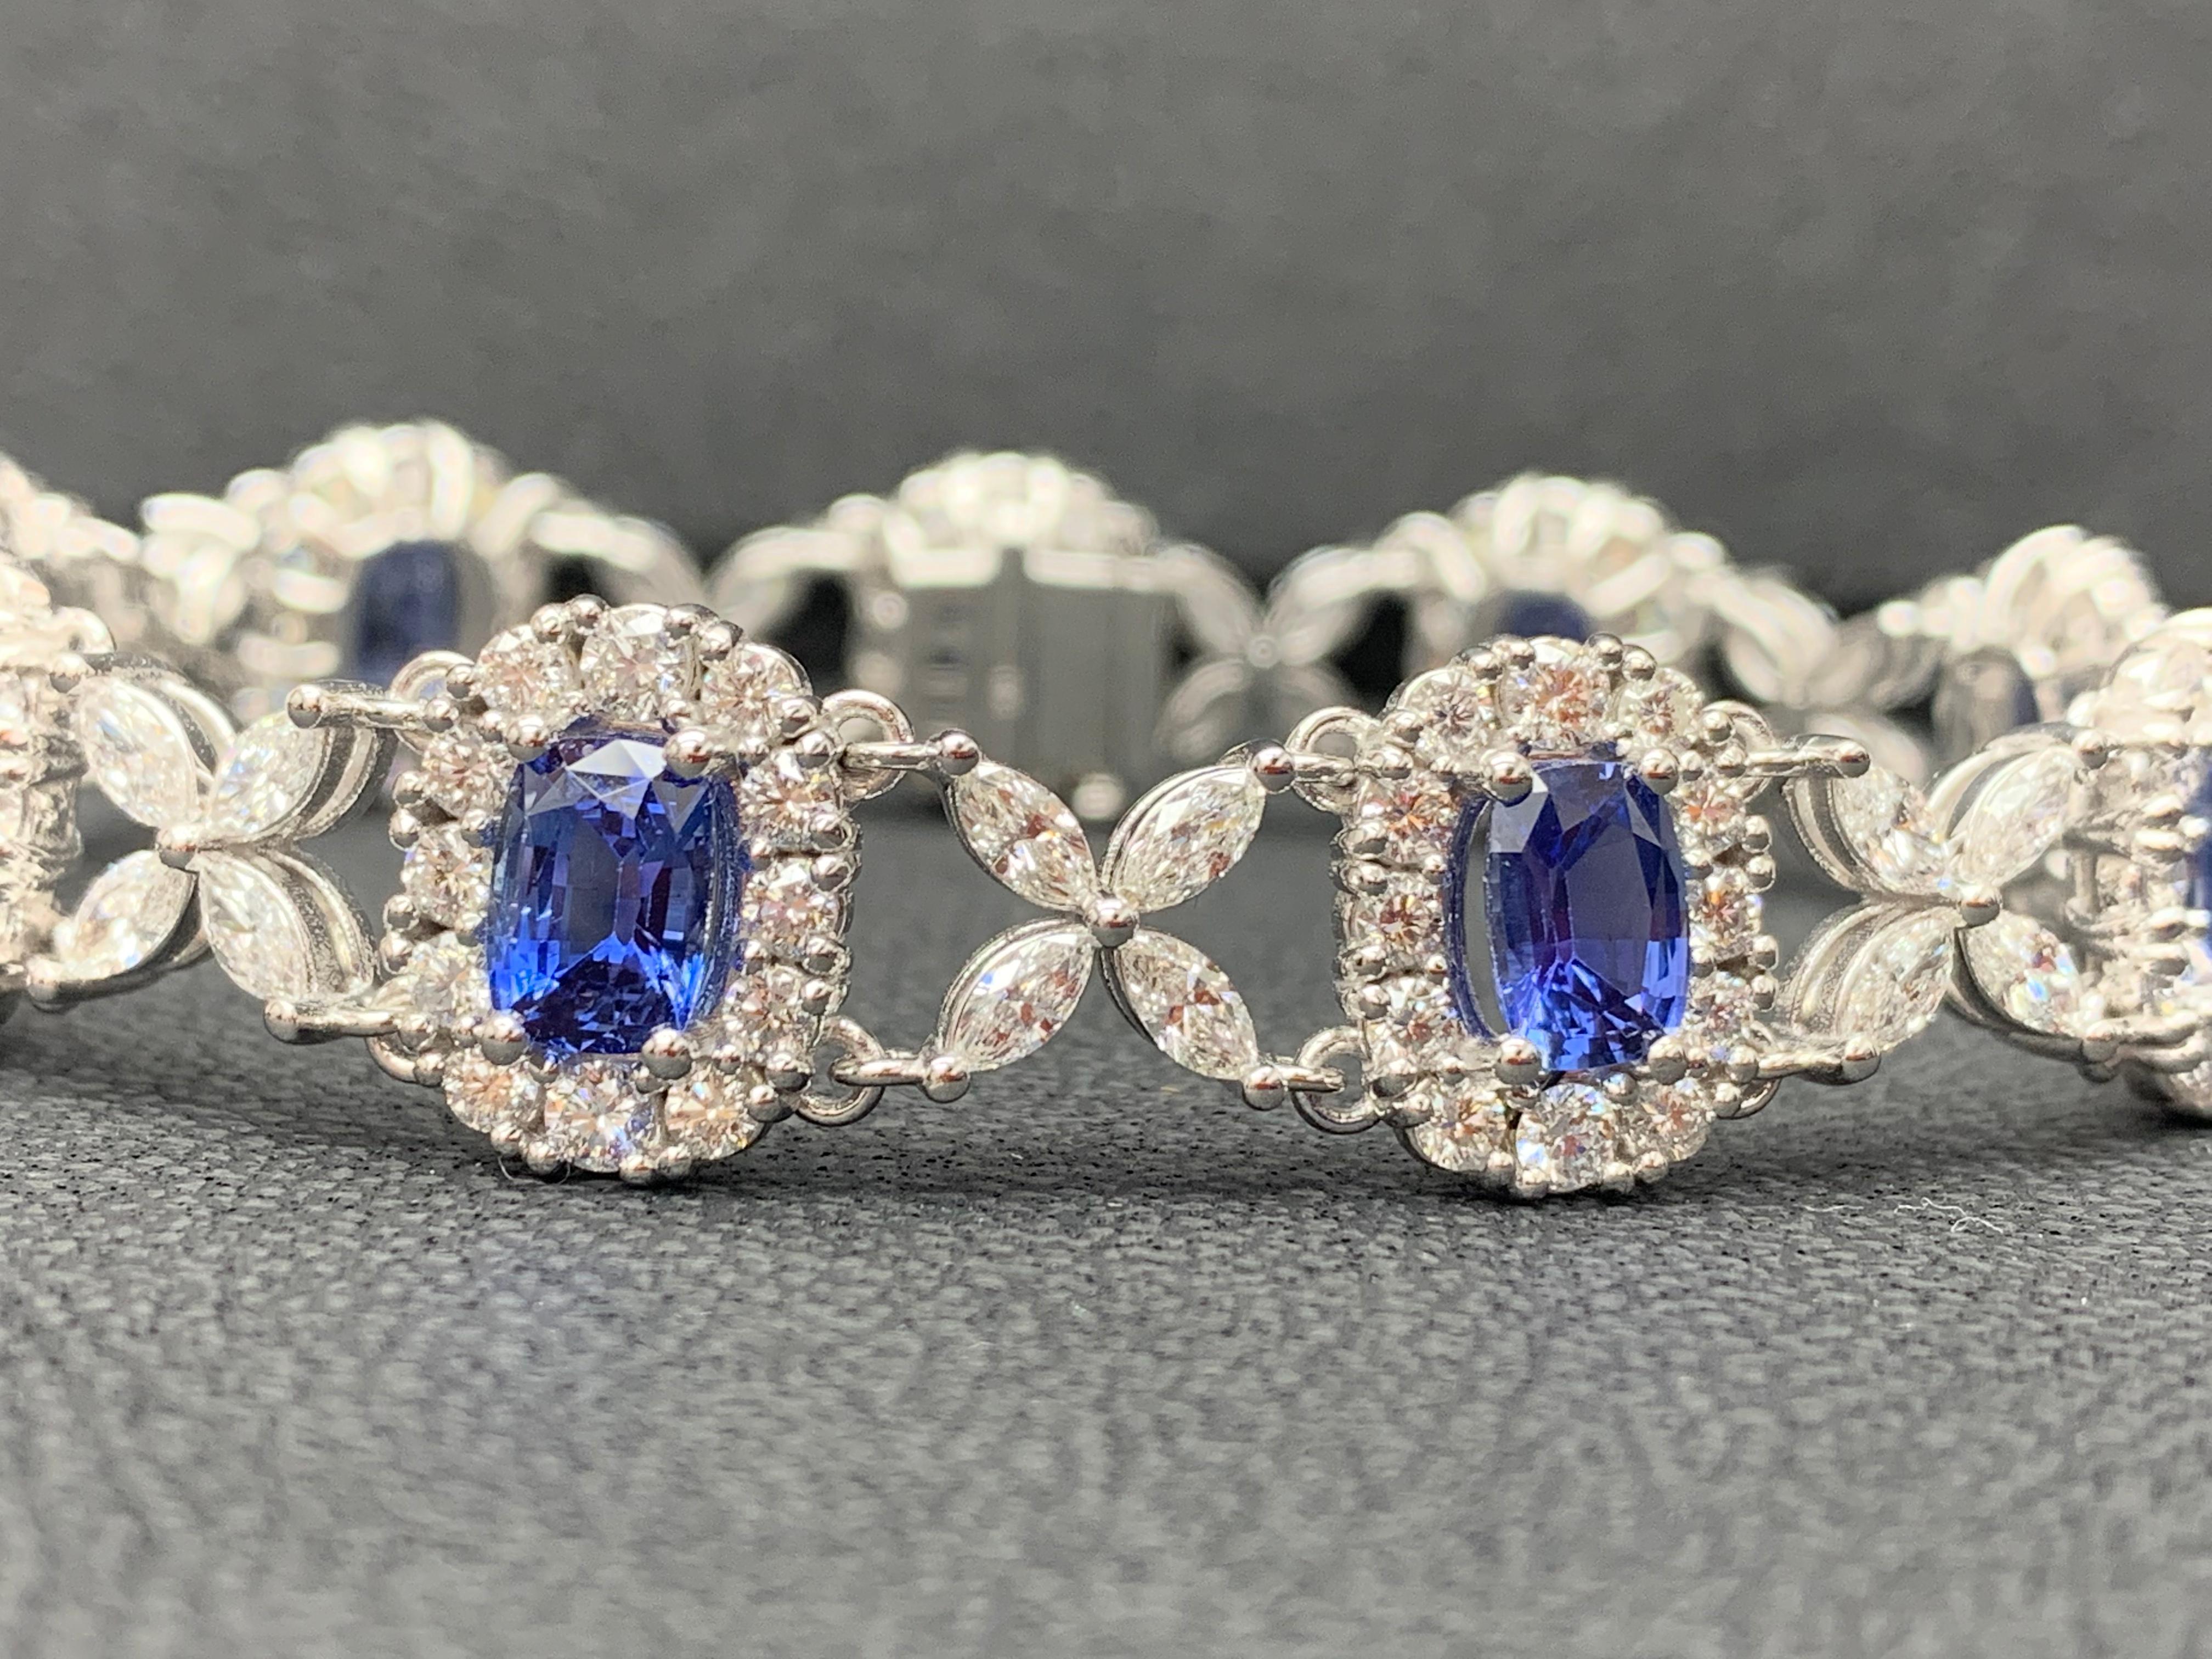 11.47 Carat Oval Cut Blue Sapphire and Diamond Tennis Bracelet in 14K White Gold For Sale 1